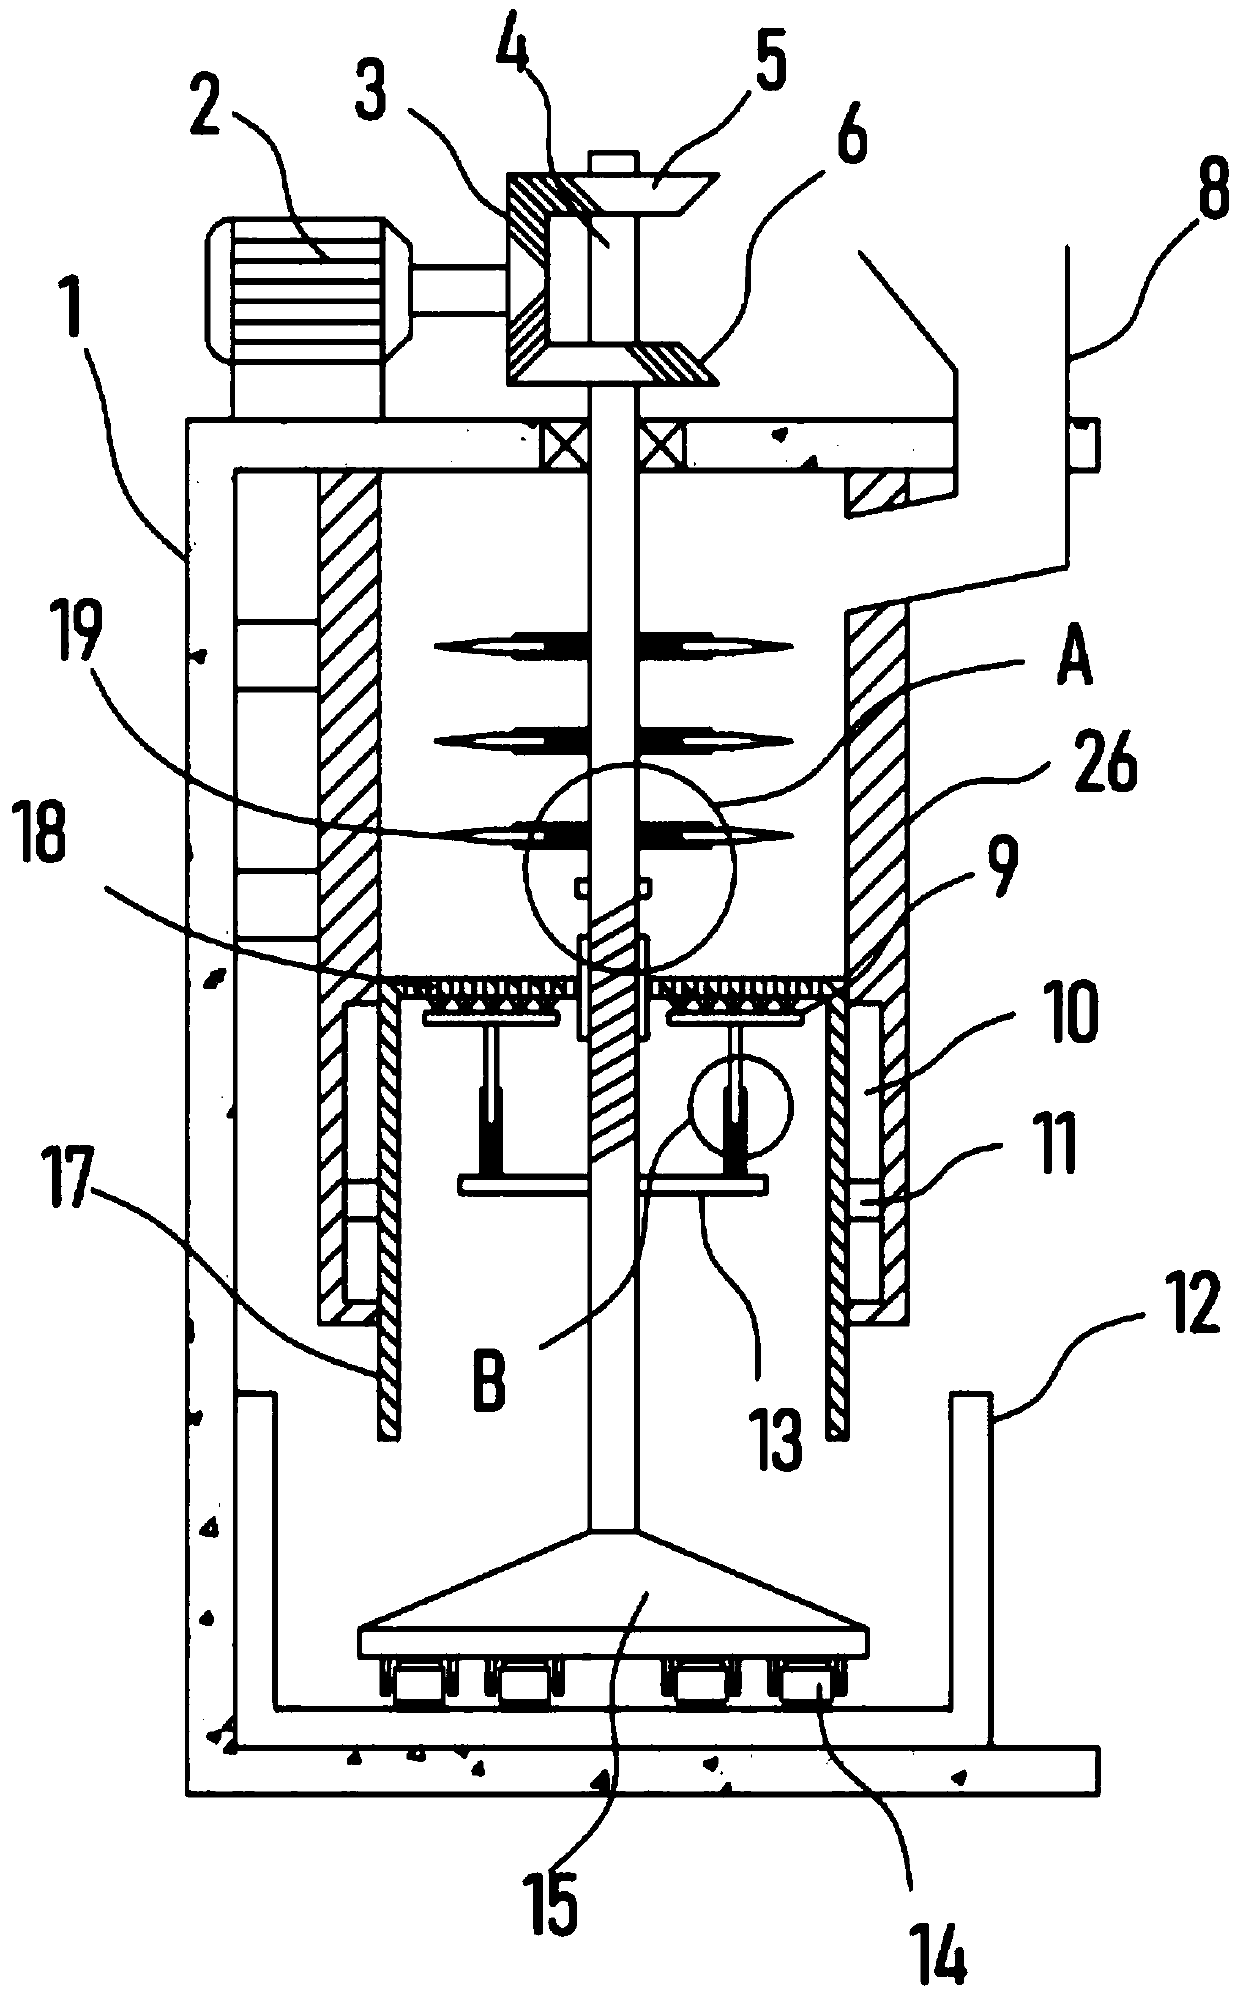 Grain crushing and grinding integrated device for agricultural production